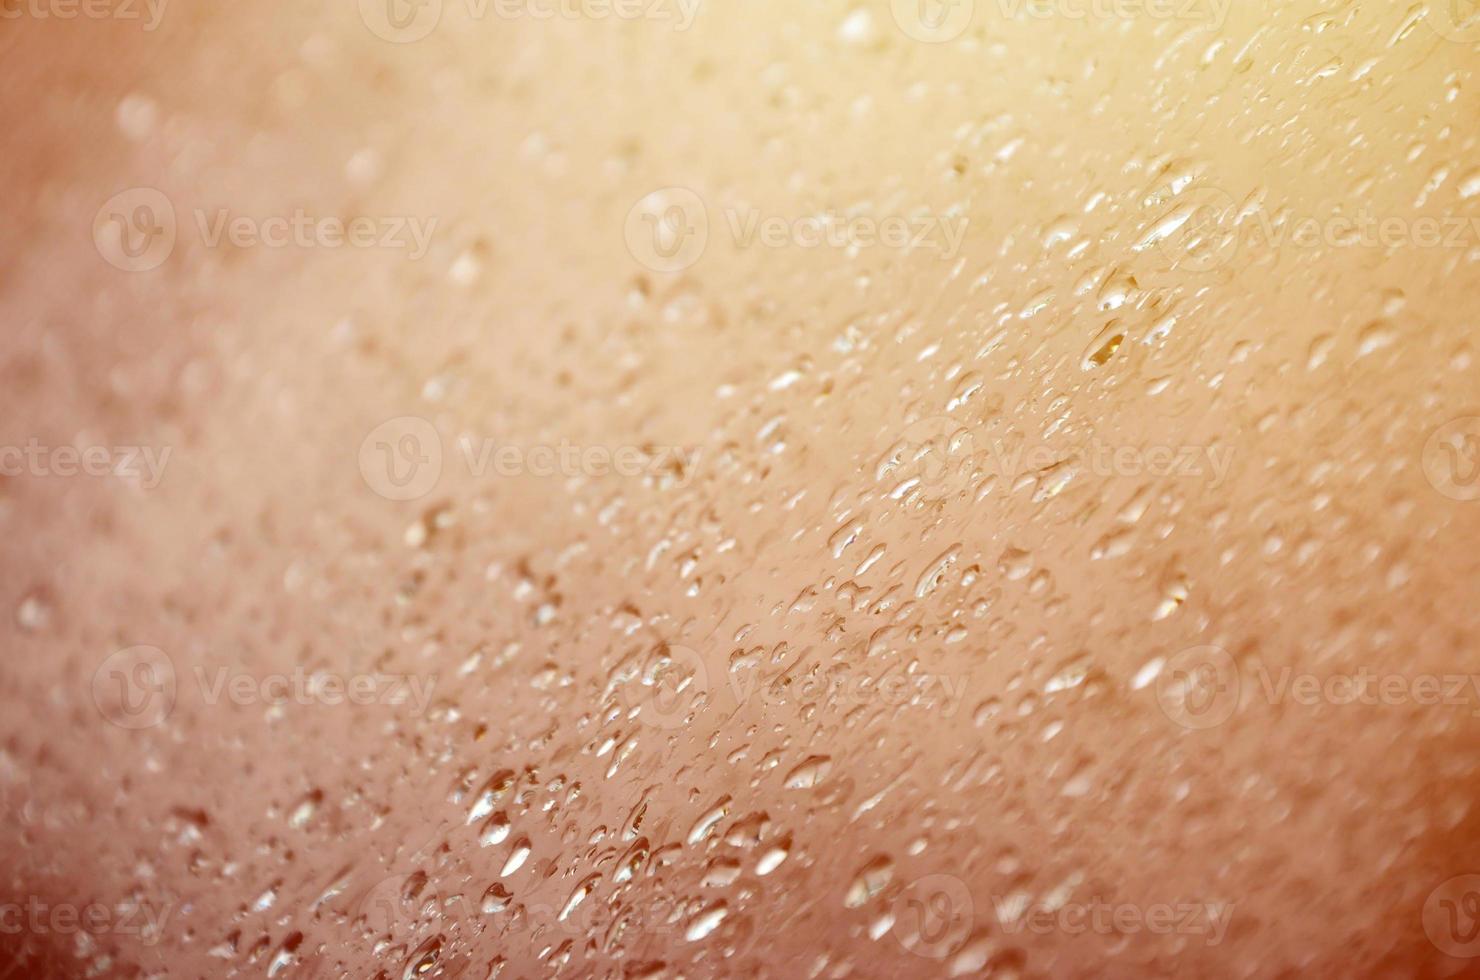 Background image of rain drops on a glass window. Macro photo with shallow depth of field. Toned picture